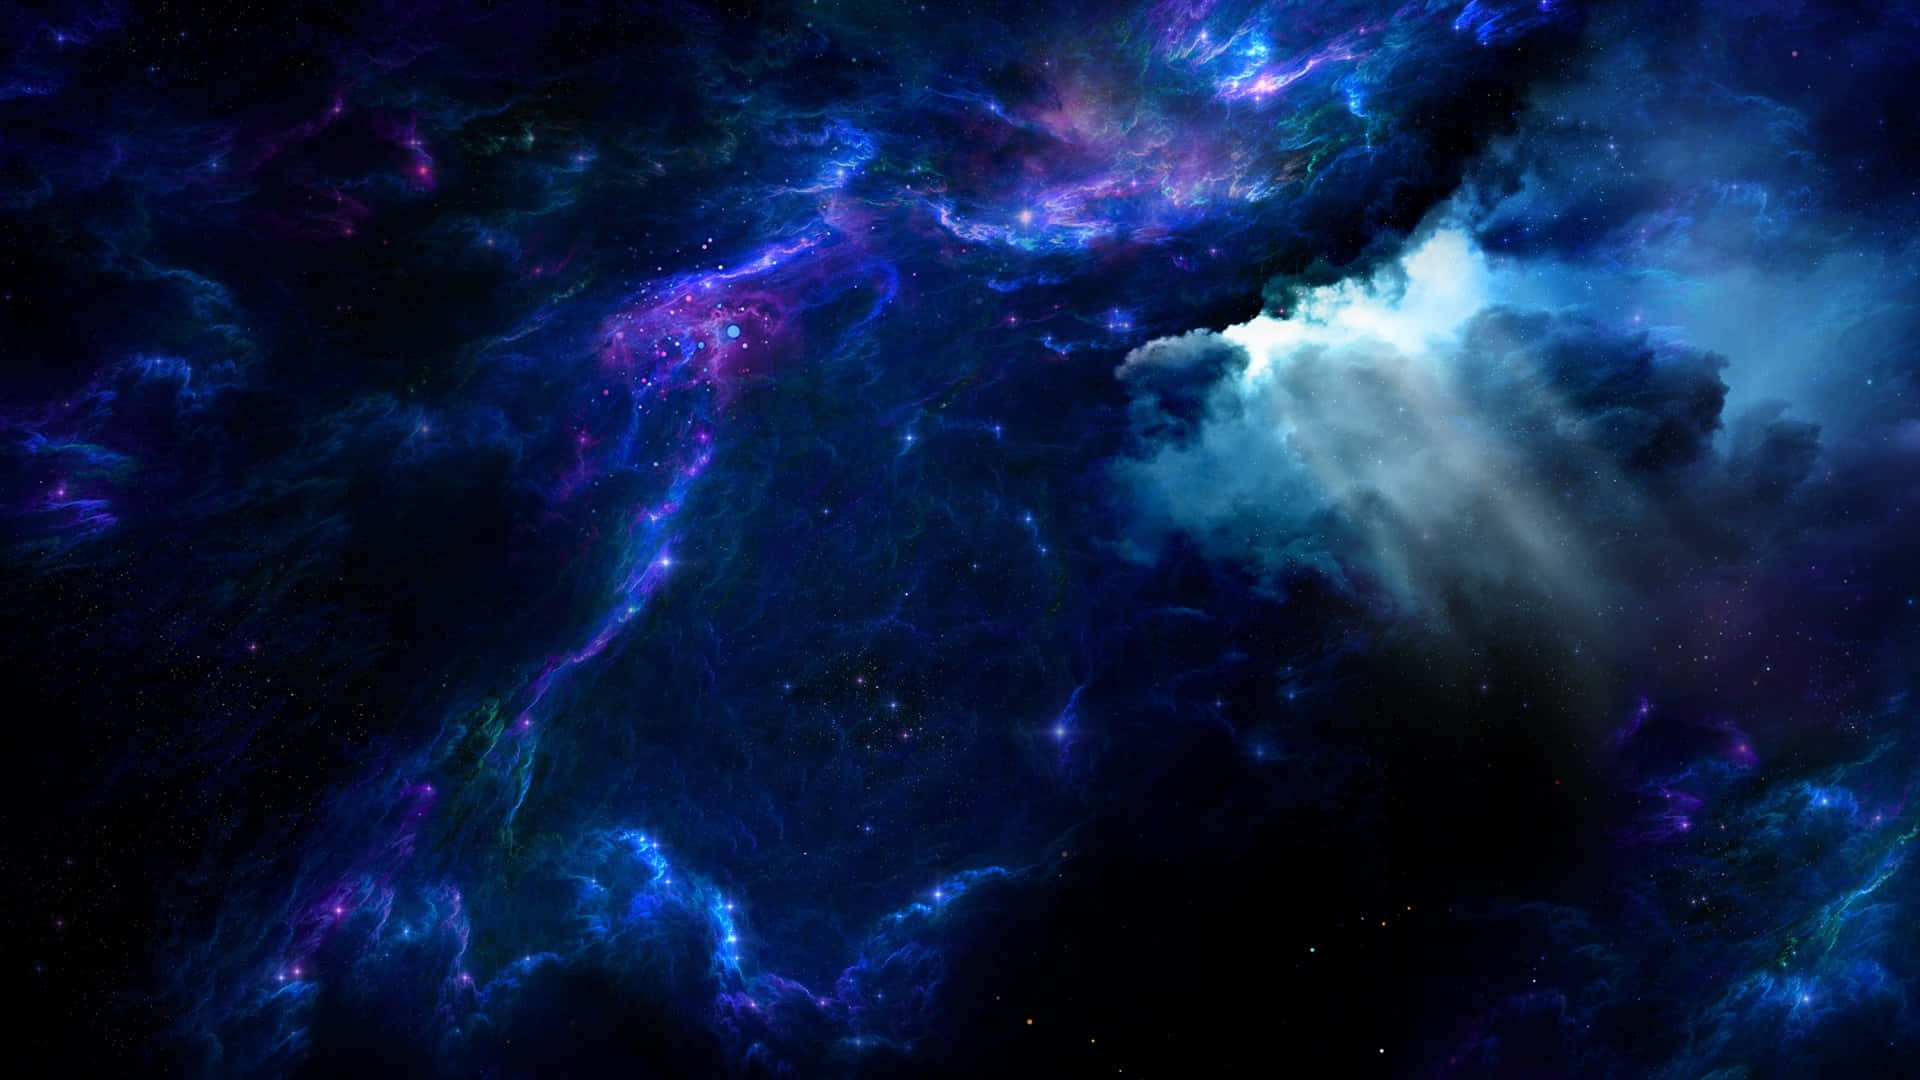 Explore the infinite beauty of the Blue Galaxy